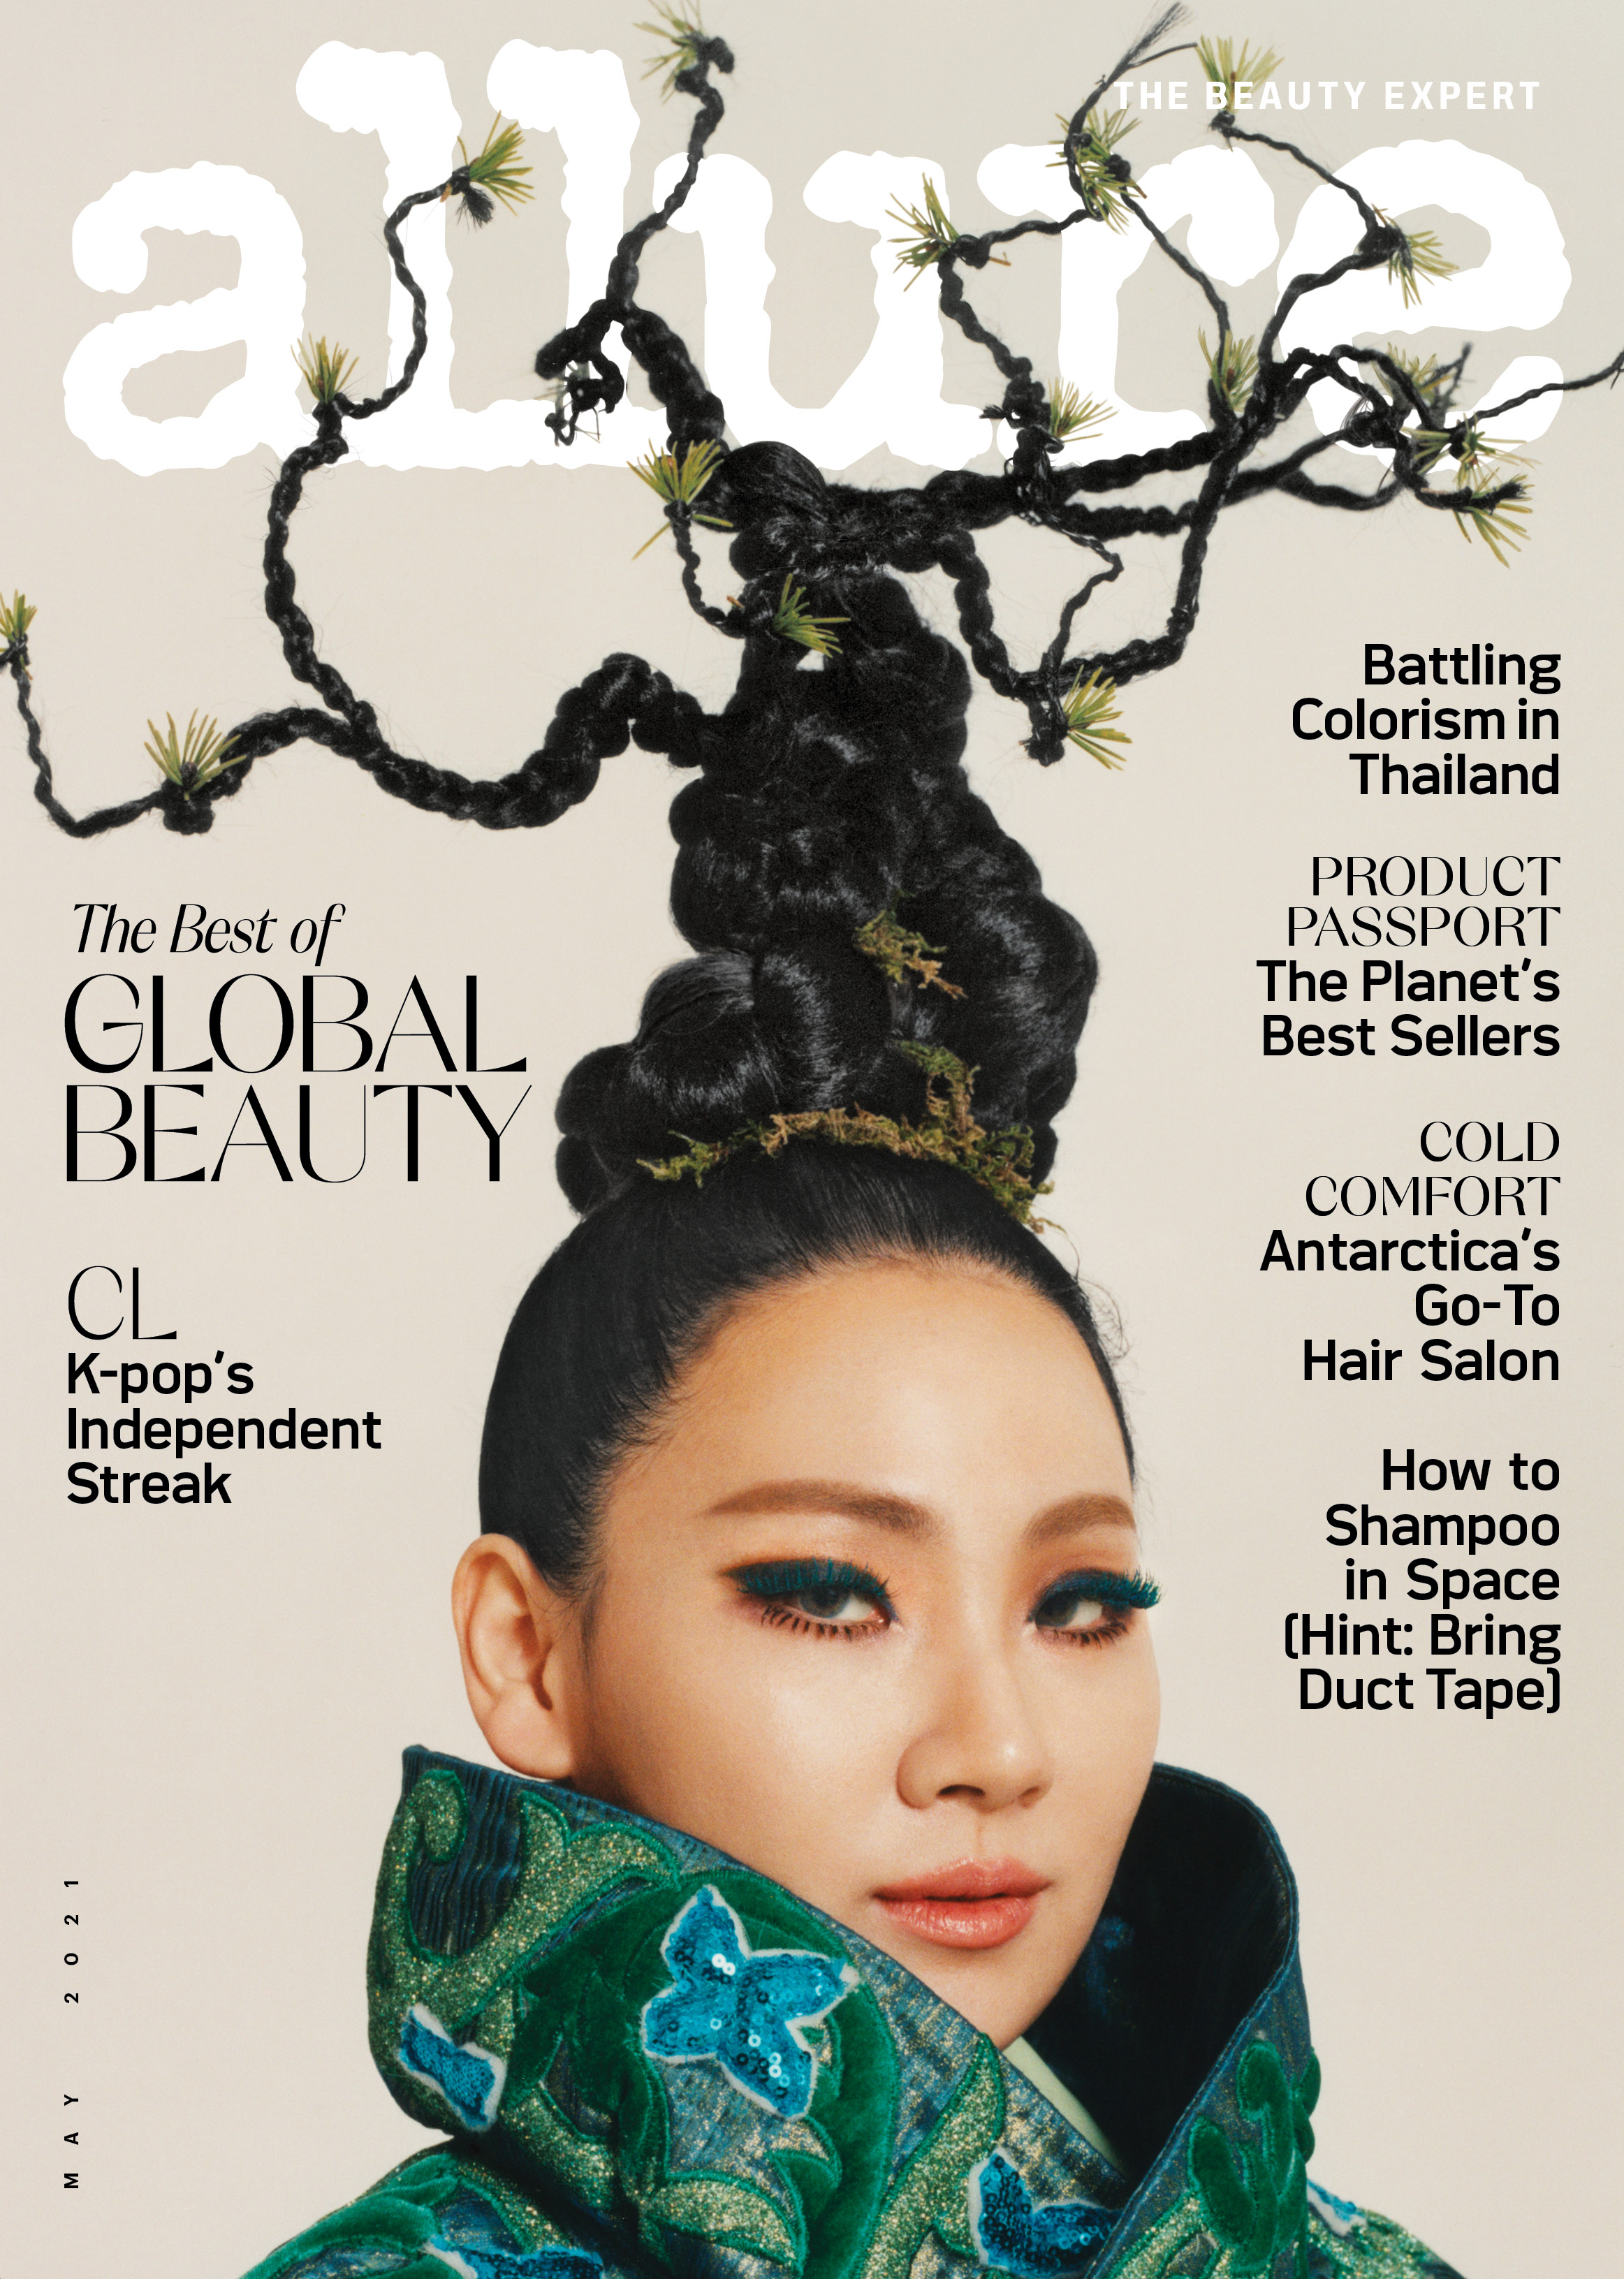 Allure - "The Best of Global Beauty," May 2021